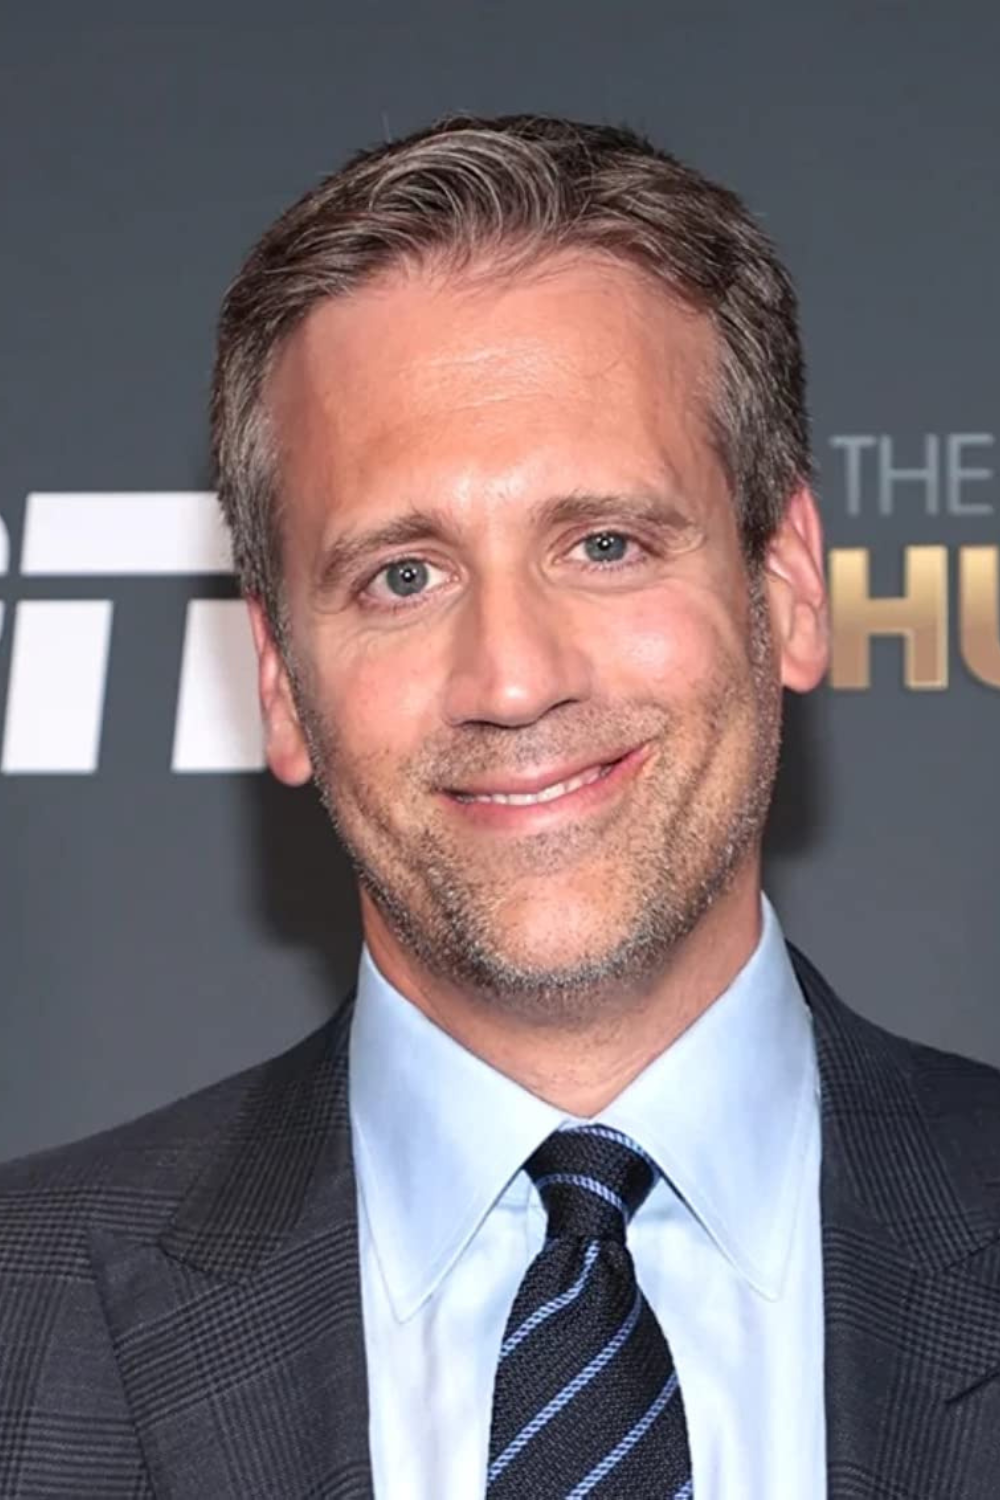 Max Kellerman, A Sports TV Personality And Boxing Commentator